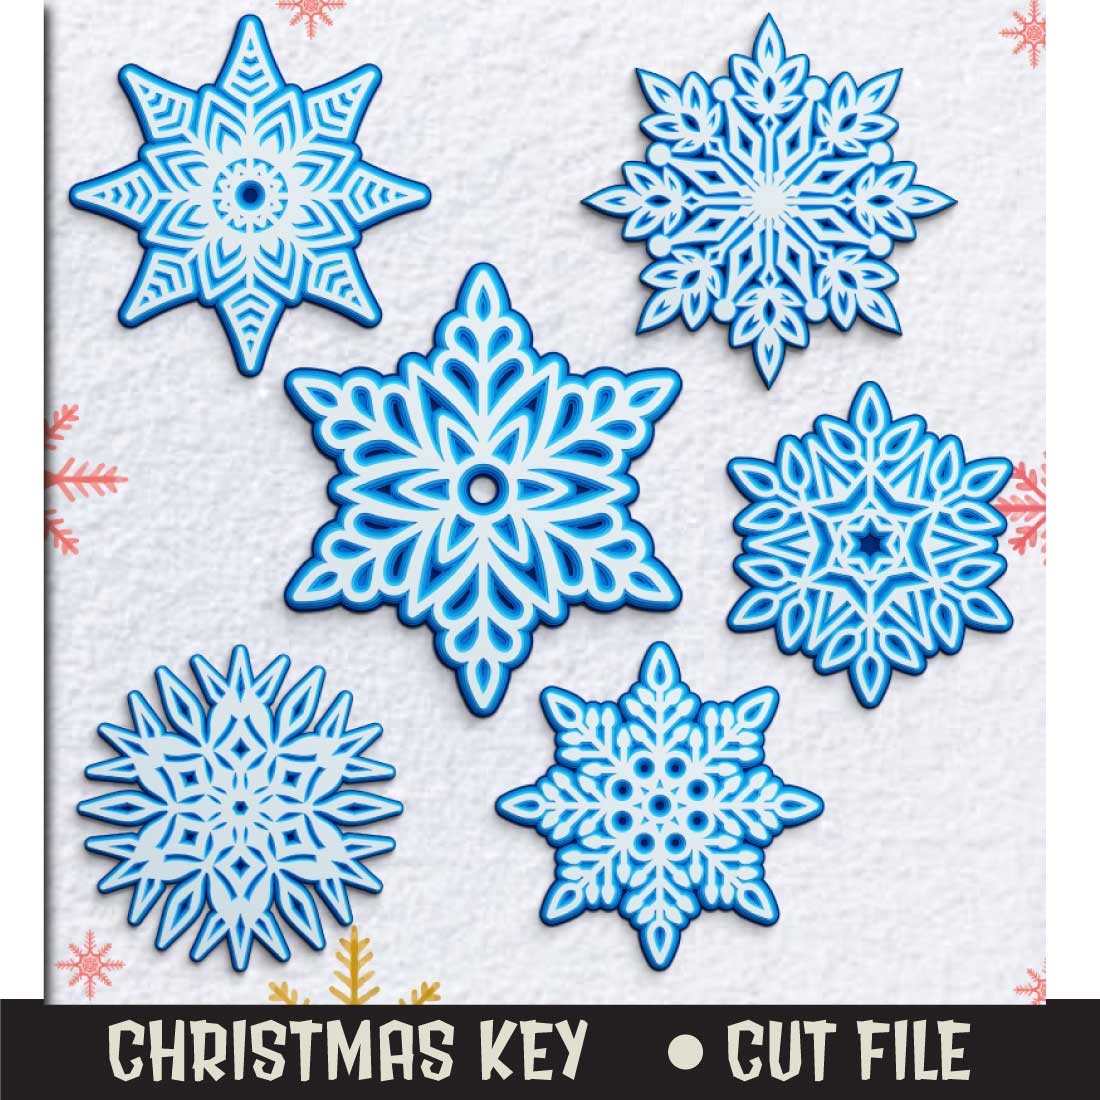 Snowflake 3D svg multilayered cut files preview image.